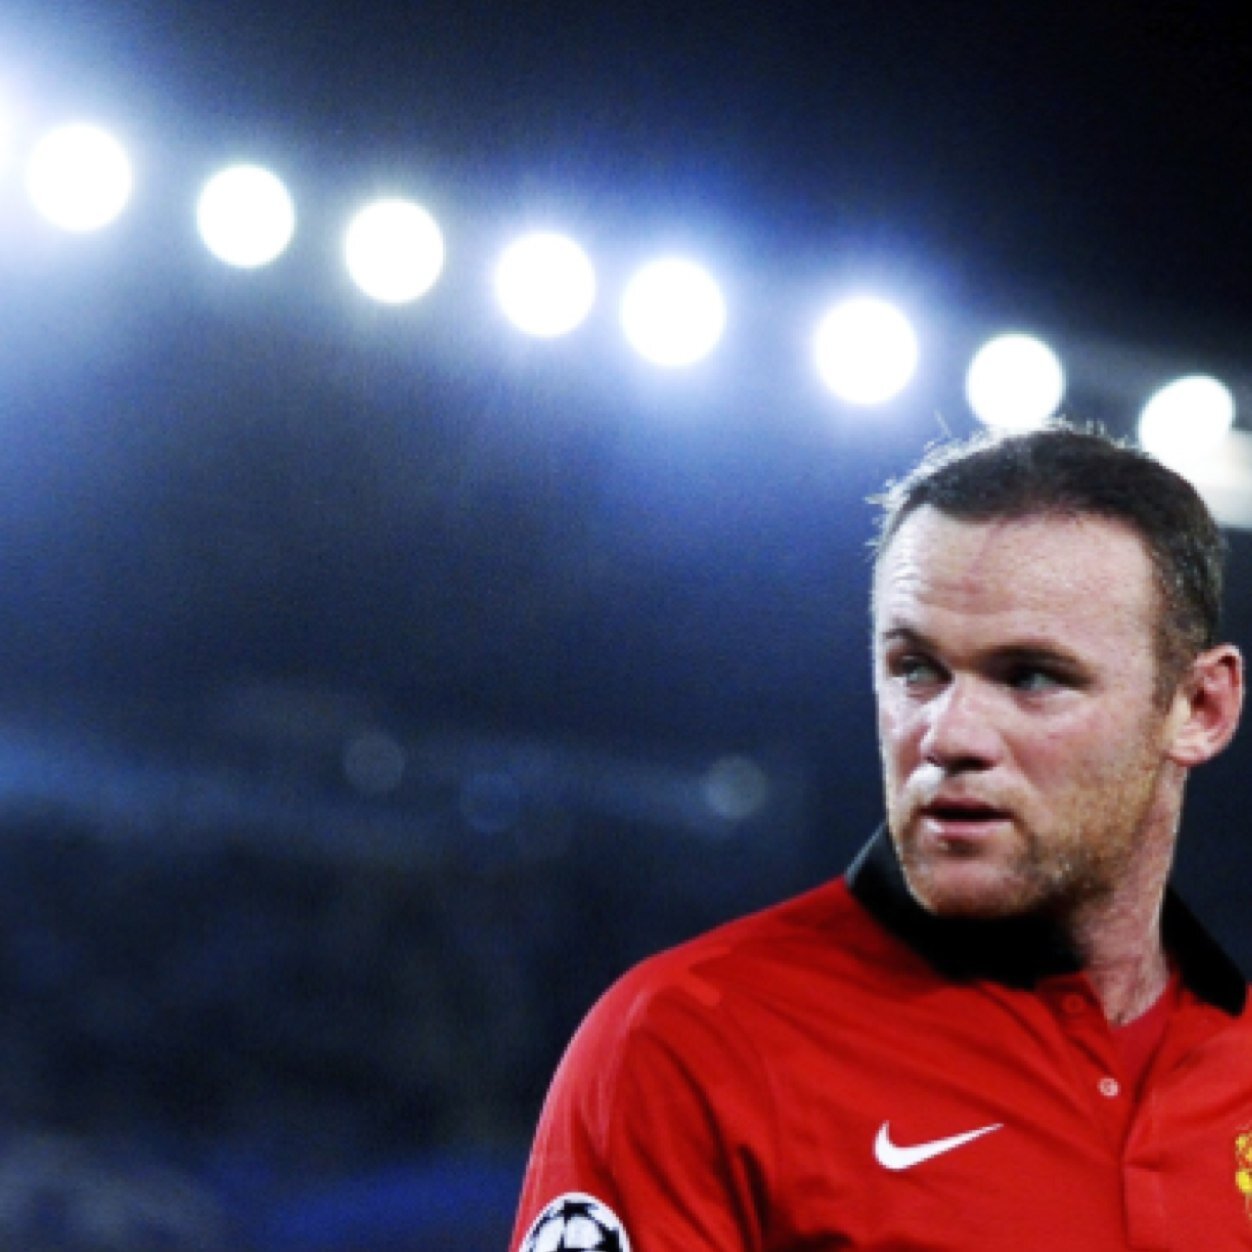 Fan page specially dedicated to Wayne Rooney and Manchester United